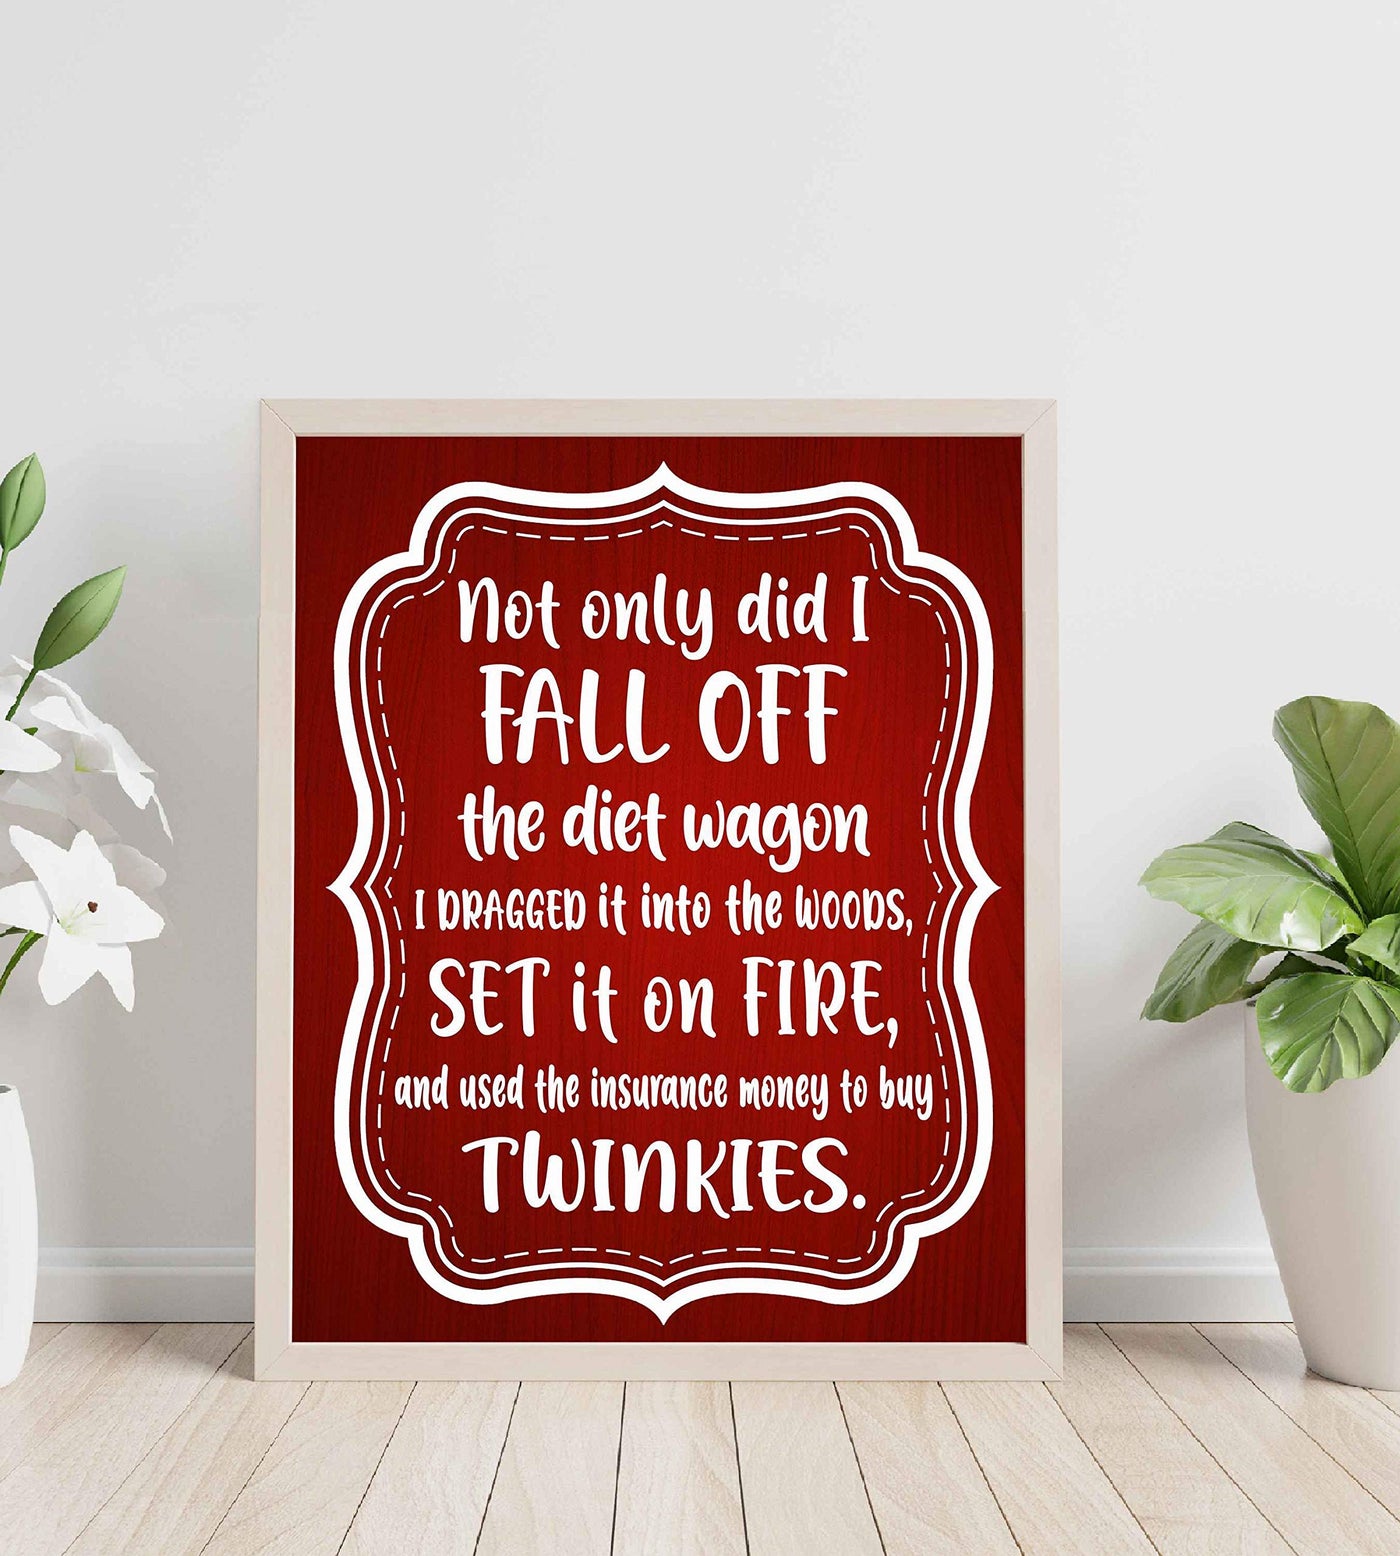 Not Only Did I Fall Off the Diet Wagon Funny Wall Art Sign -8 x 10" Humorous Typographic Poster Print-Ready to Frame. Perfect Home-Kitchen-Office-Cave-She Shed Decor. Fun Novelty Gift for All!